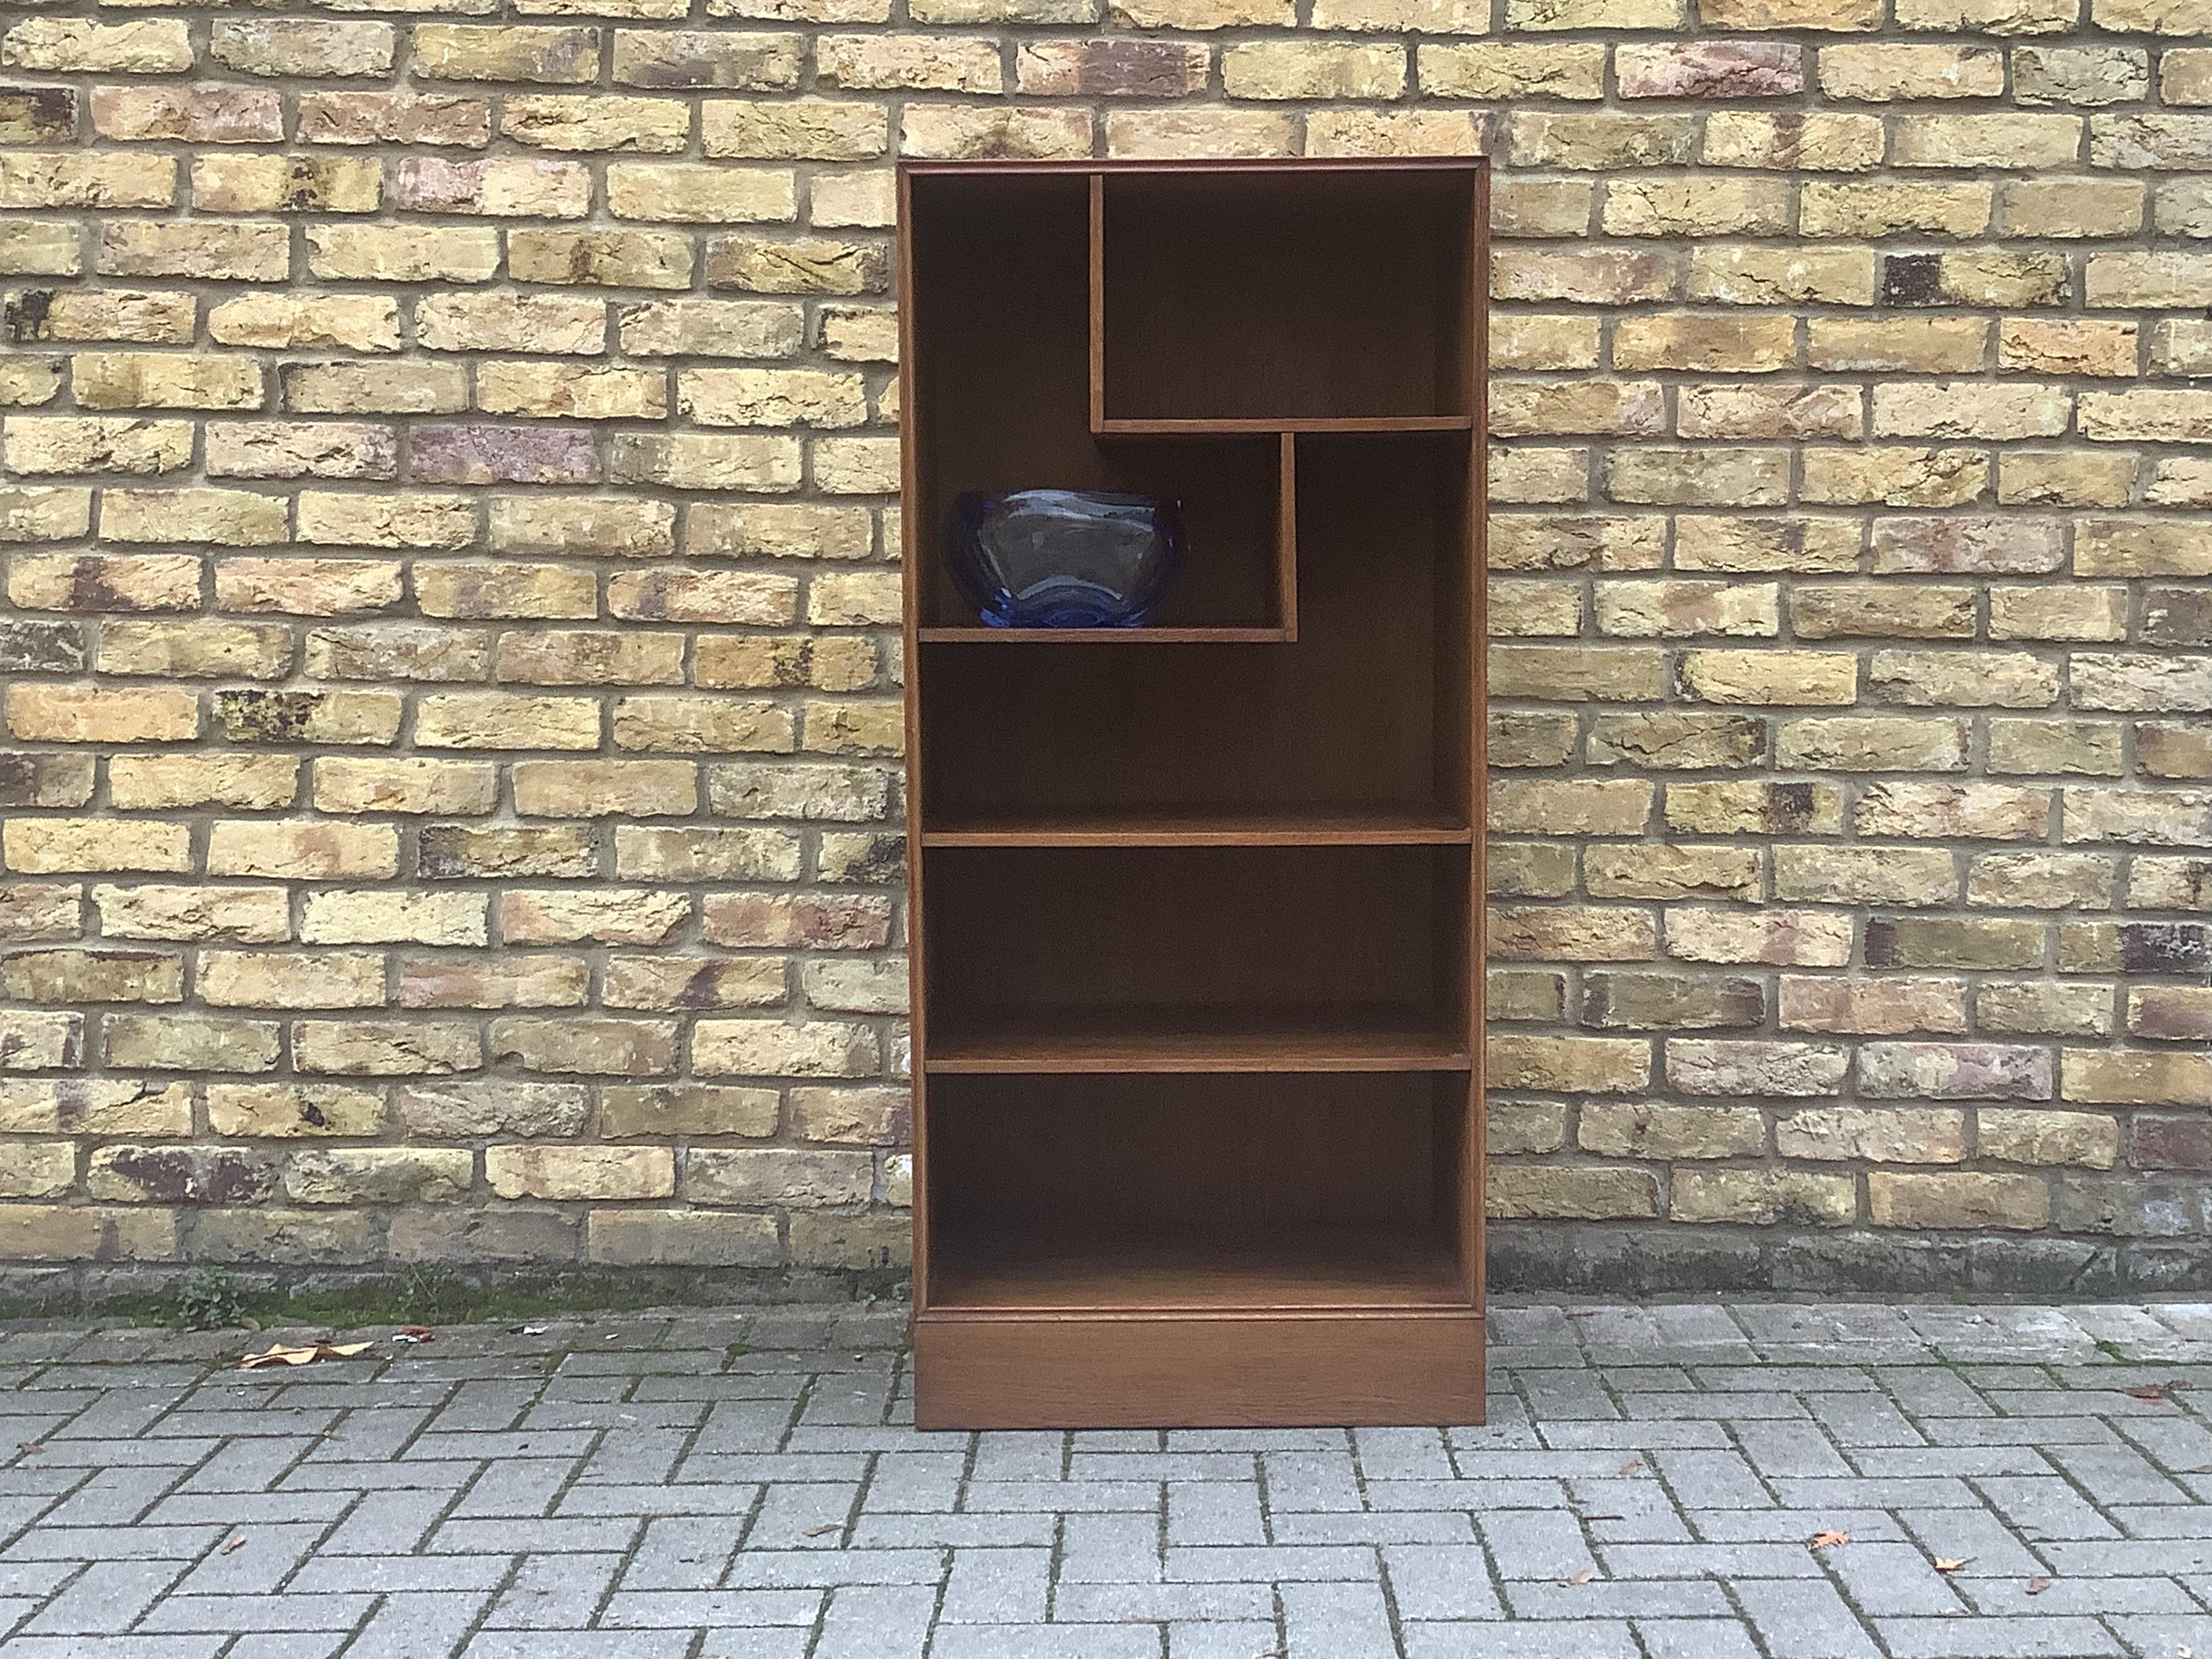 Compact oak bookcase with 4 storage shelves with a T shape design on the top shelving.
Ideal for displaying.